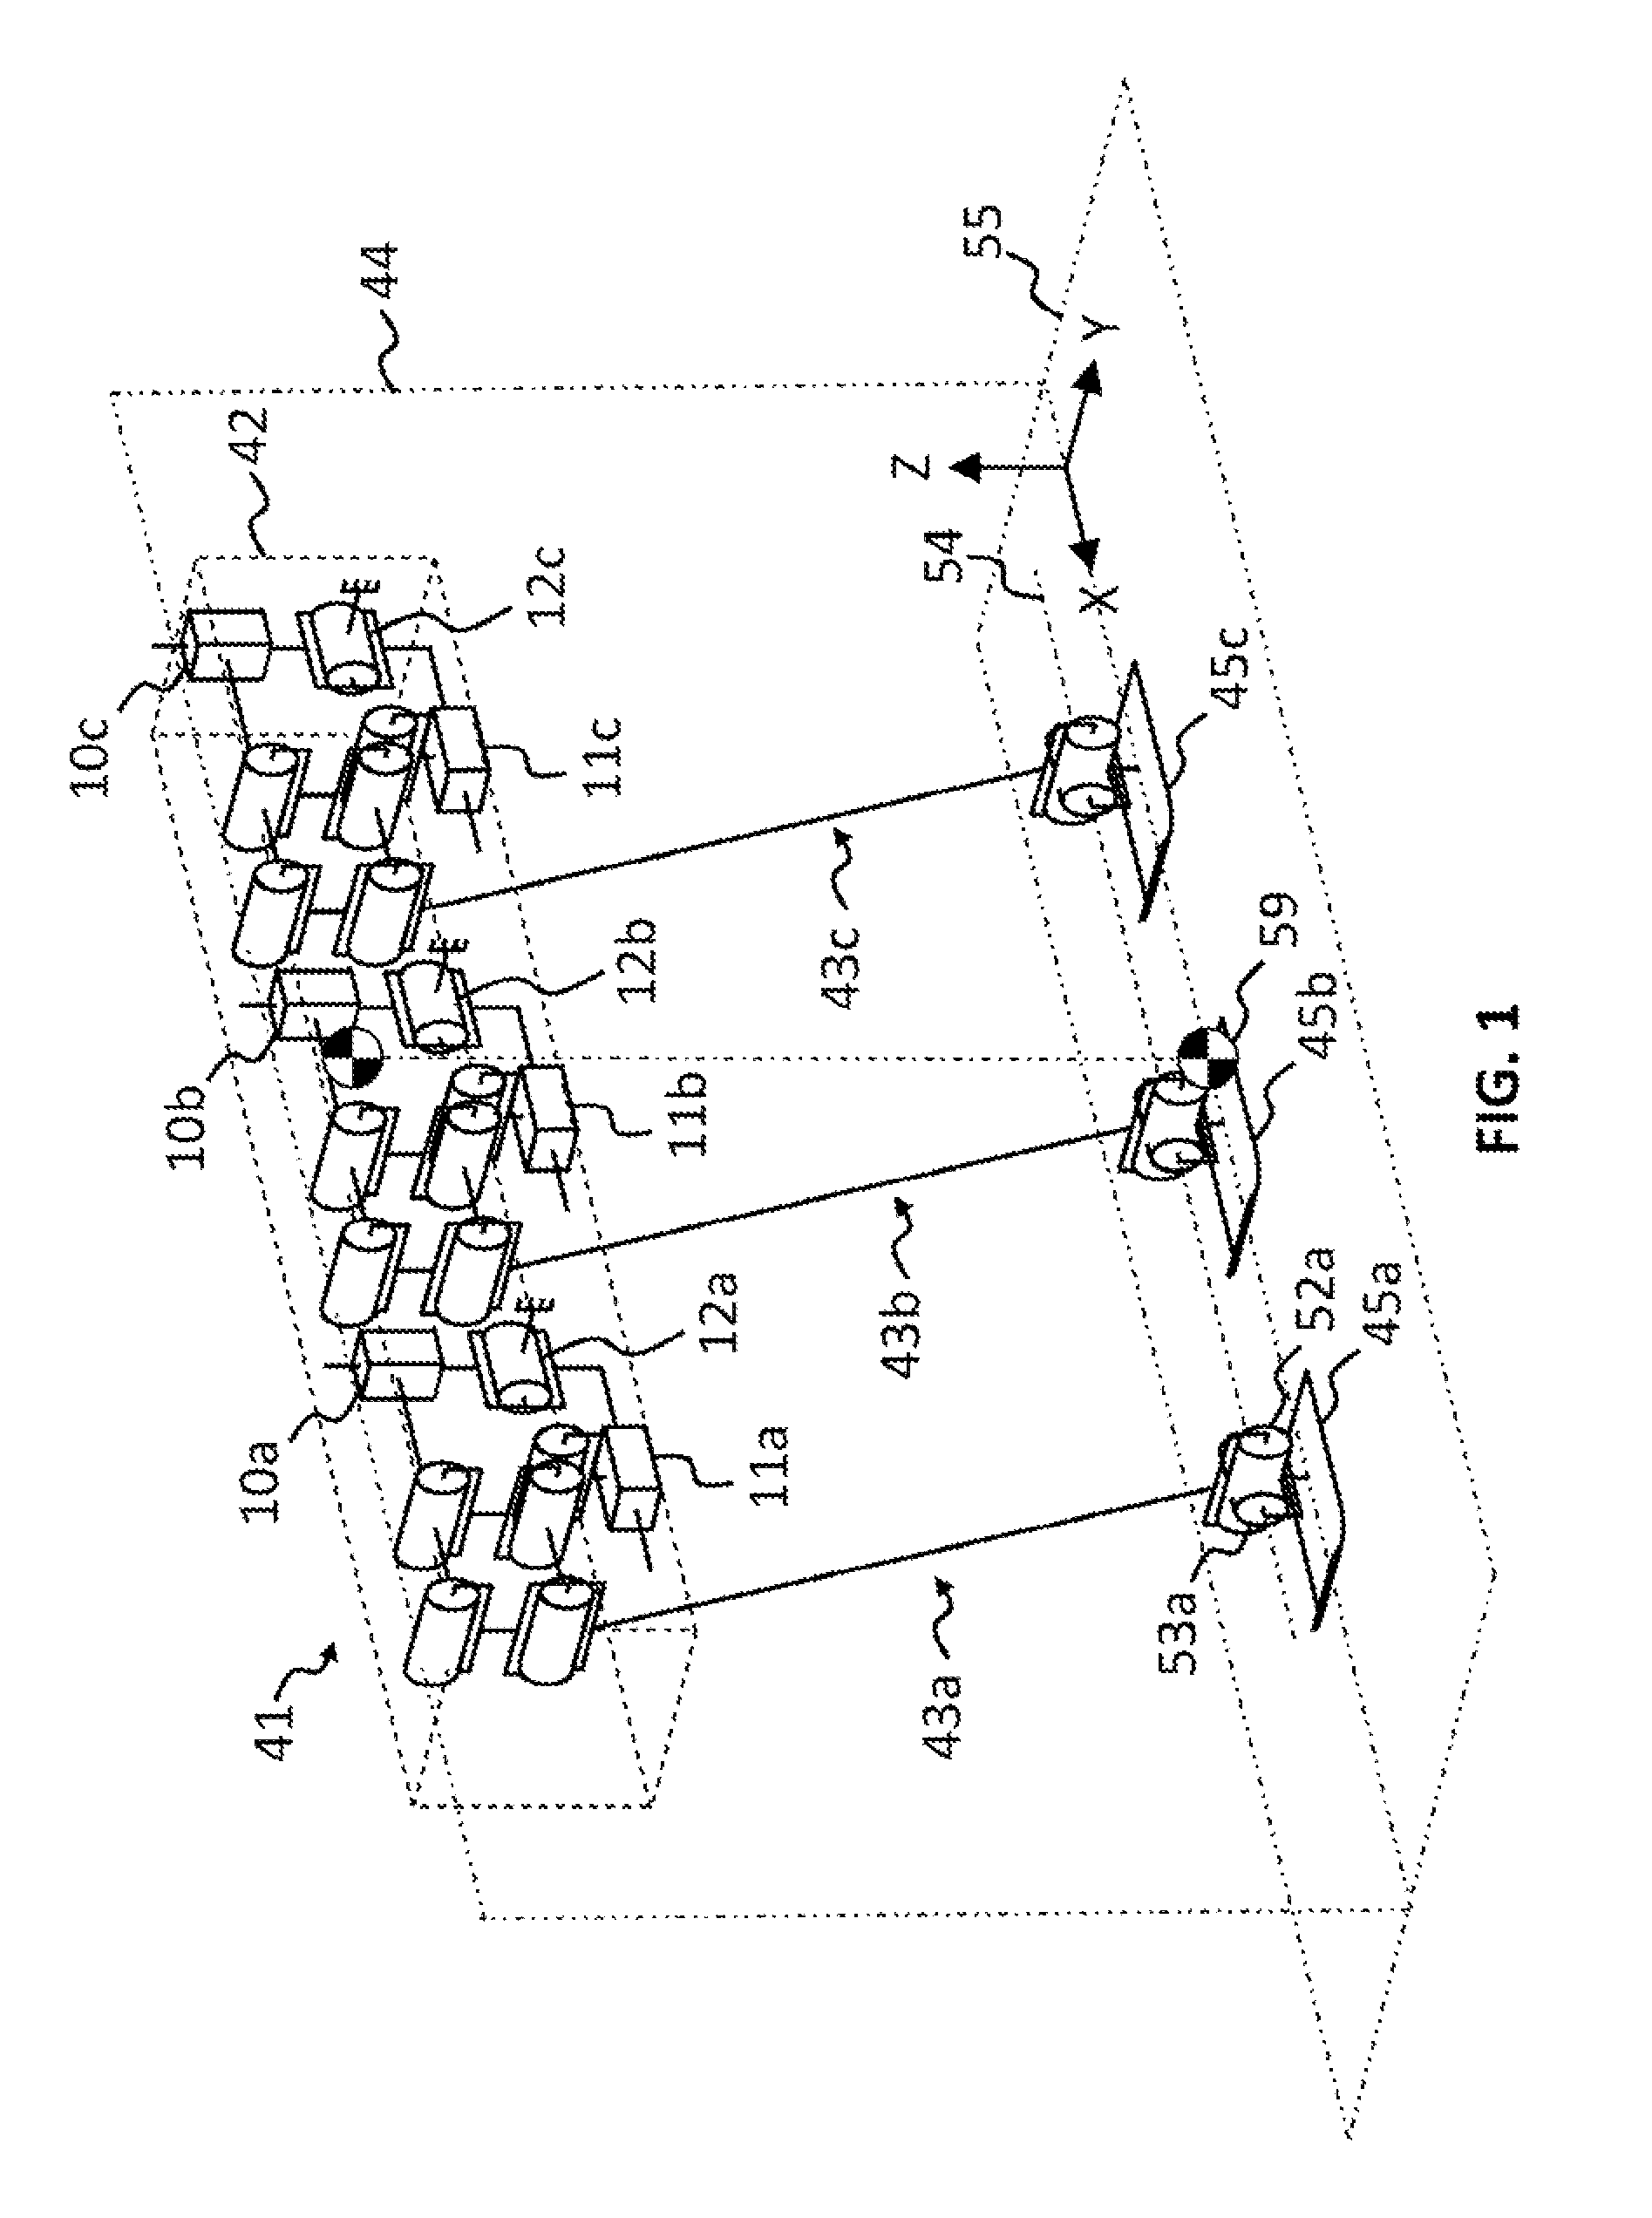 In-line legged robot vehicle and method for operating